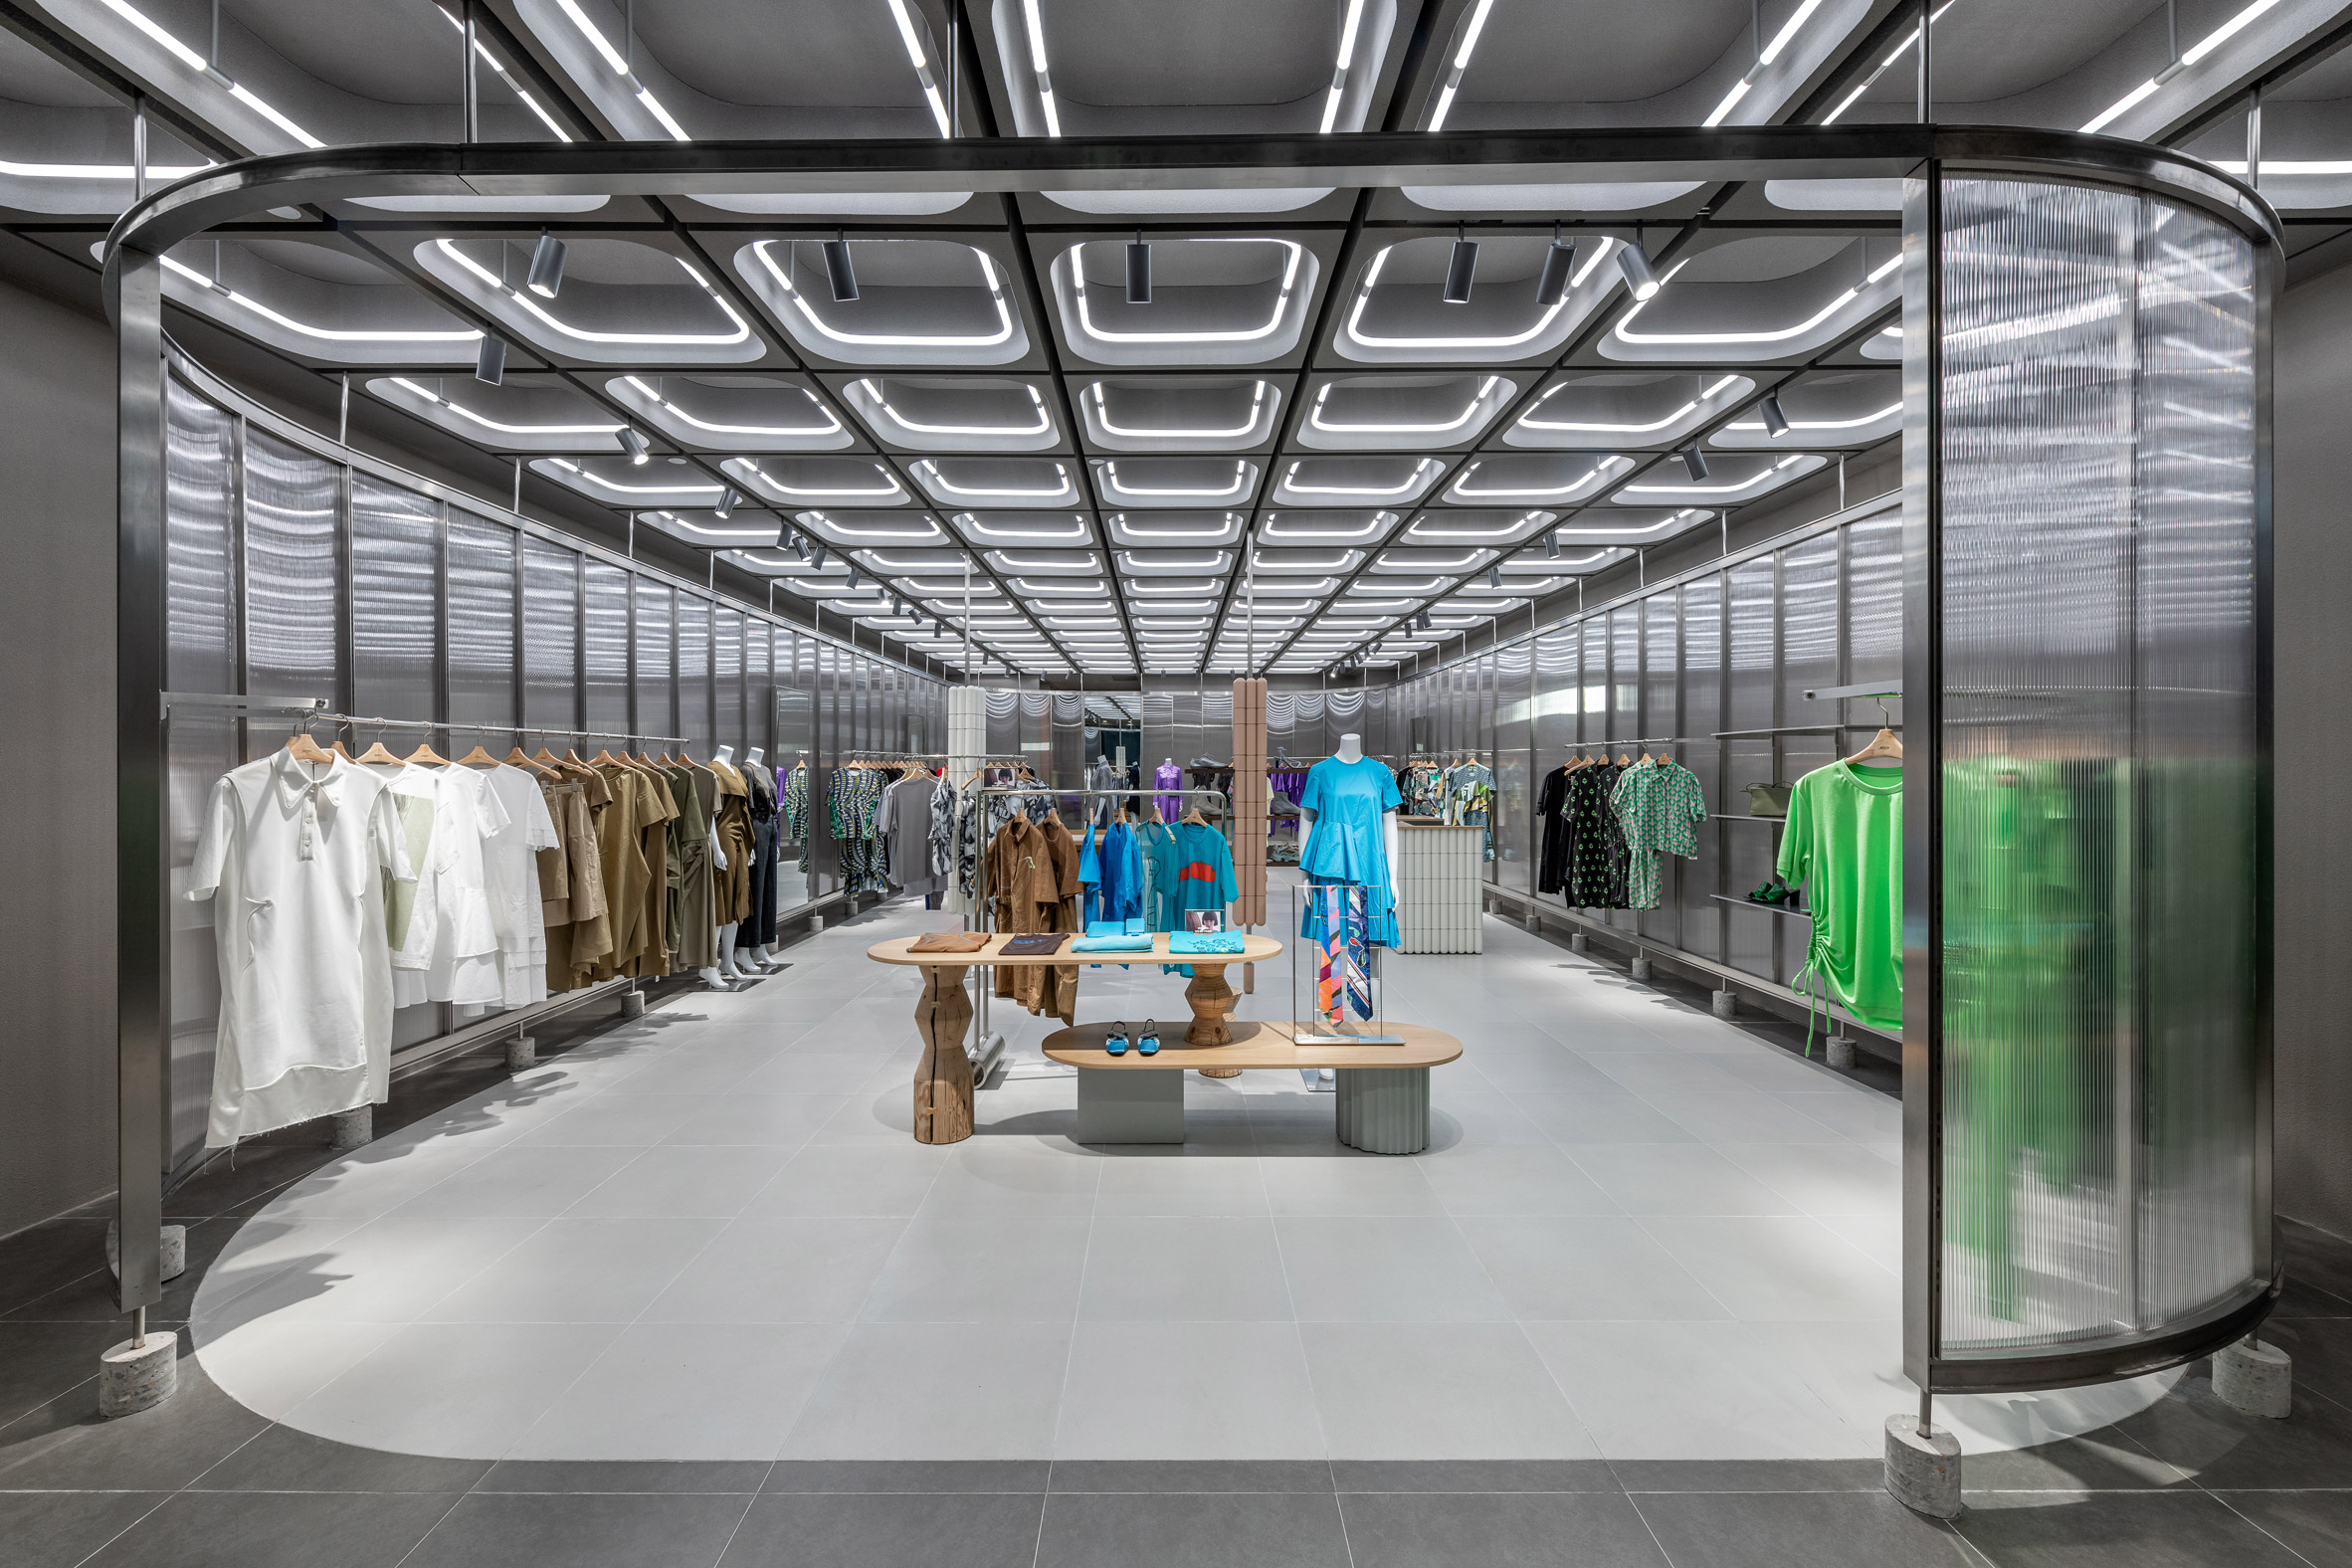 Interiors of JNBY store in Xiamen, China feature concrete, steel and glass